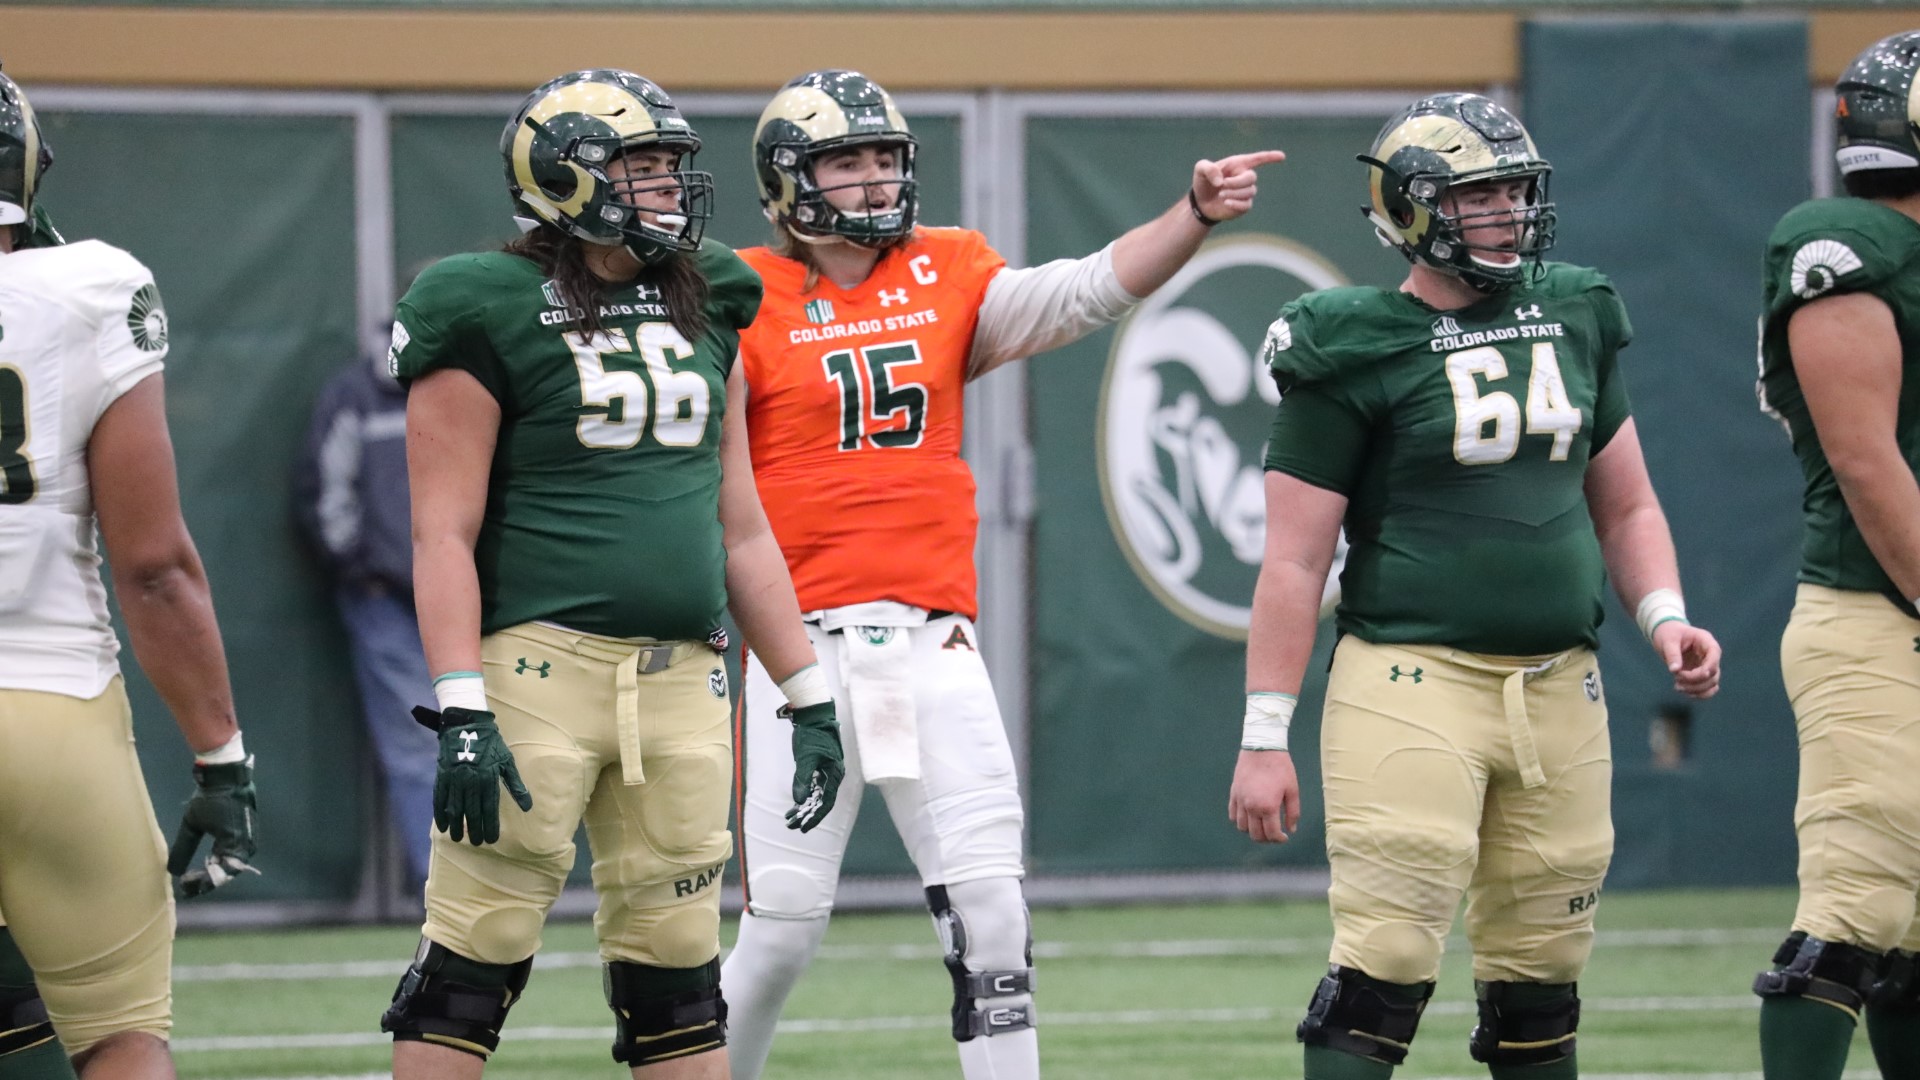 Colorado State quarterback Collin Hill played two series of last year's Rocky Mountain Showdown. Now that he's healthy, he's ready to make his mark.